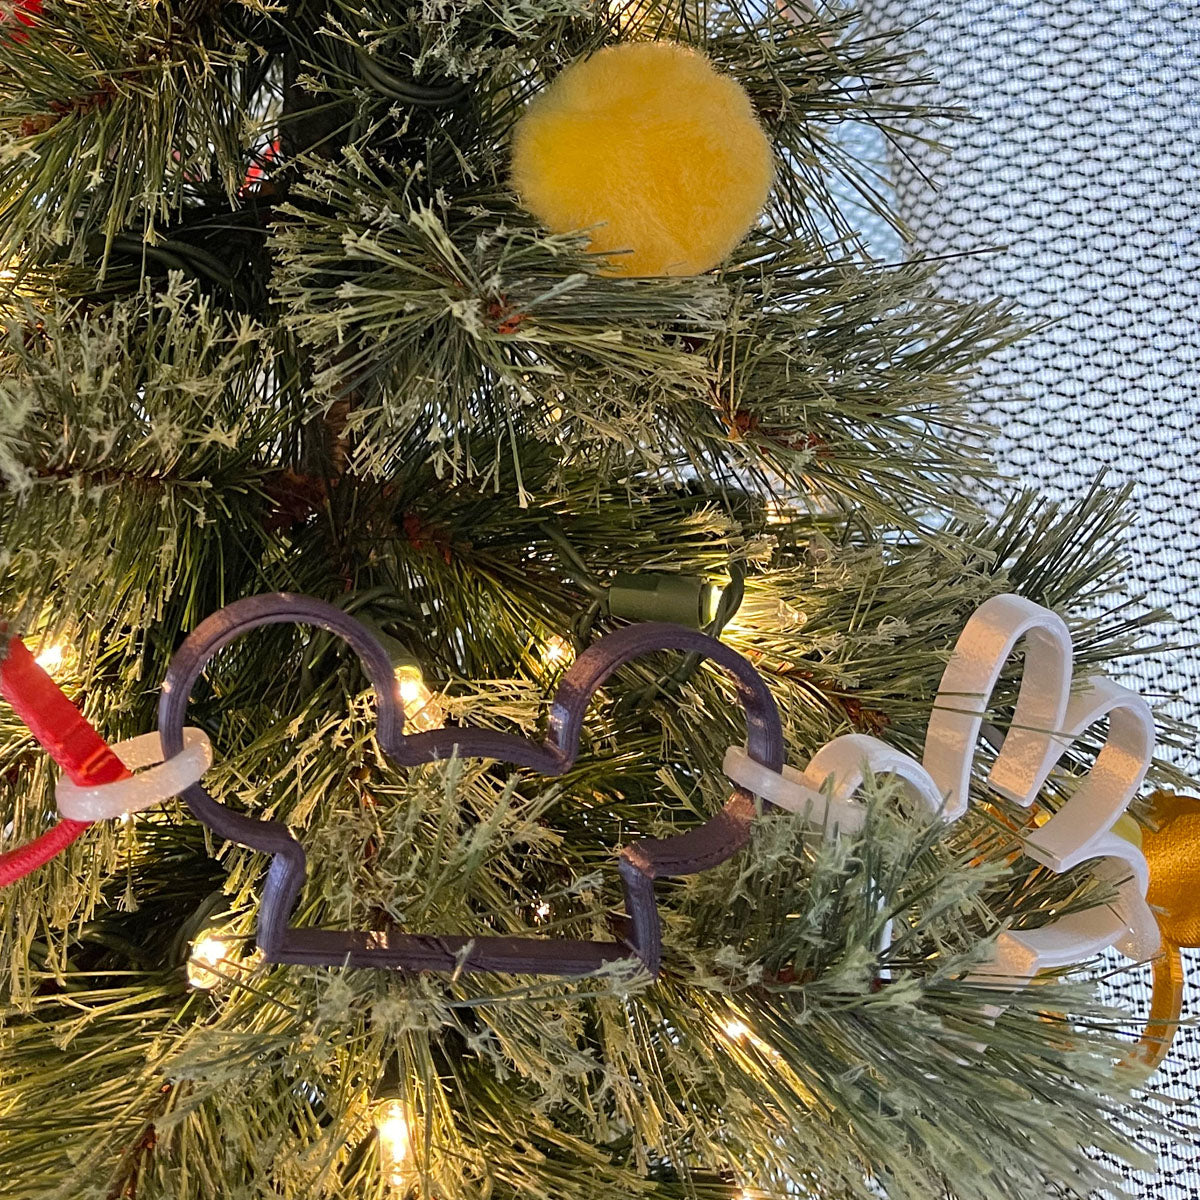 Mouse Parts Linked Garland